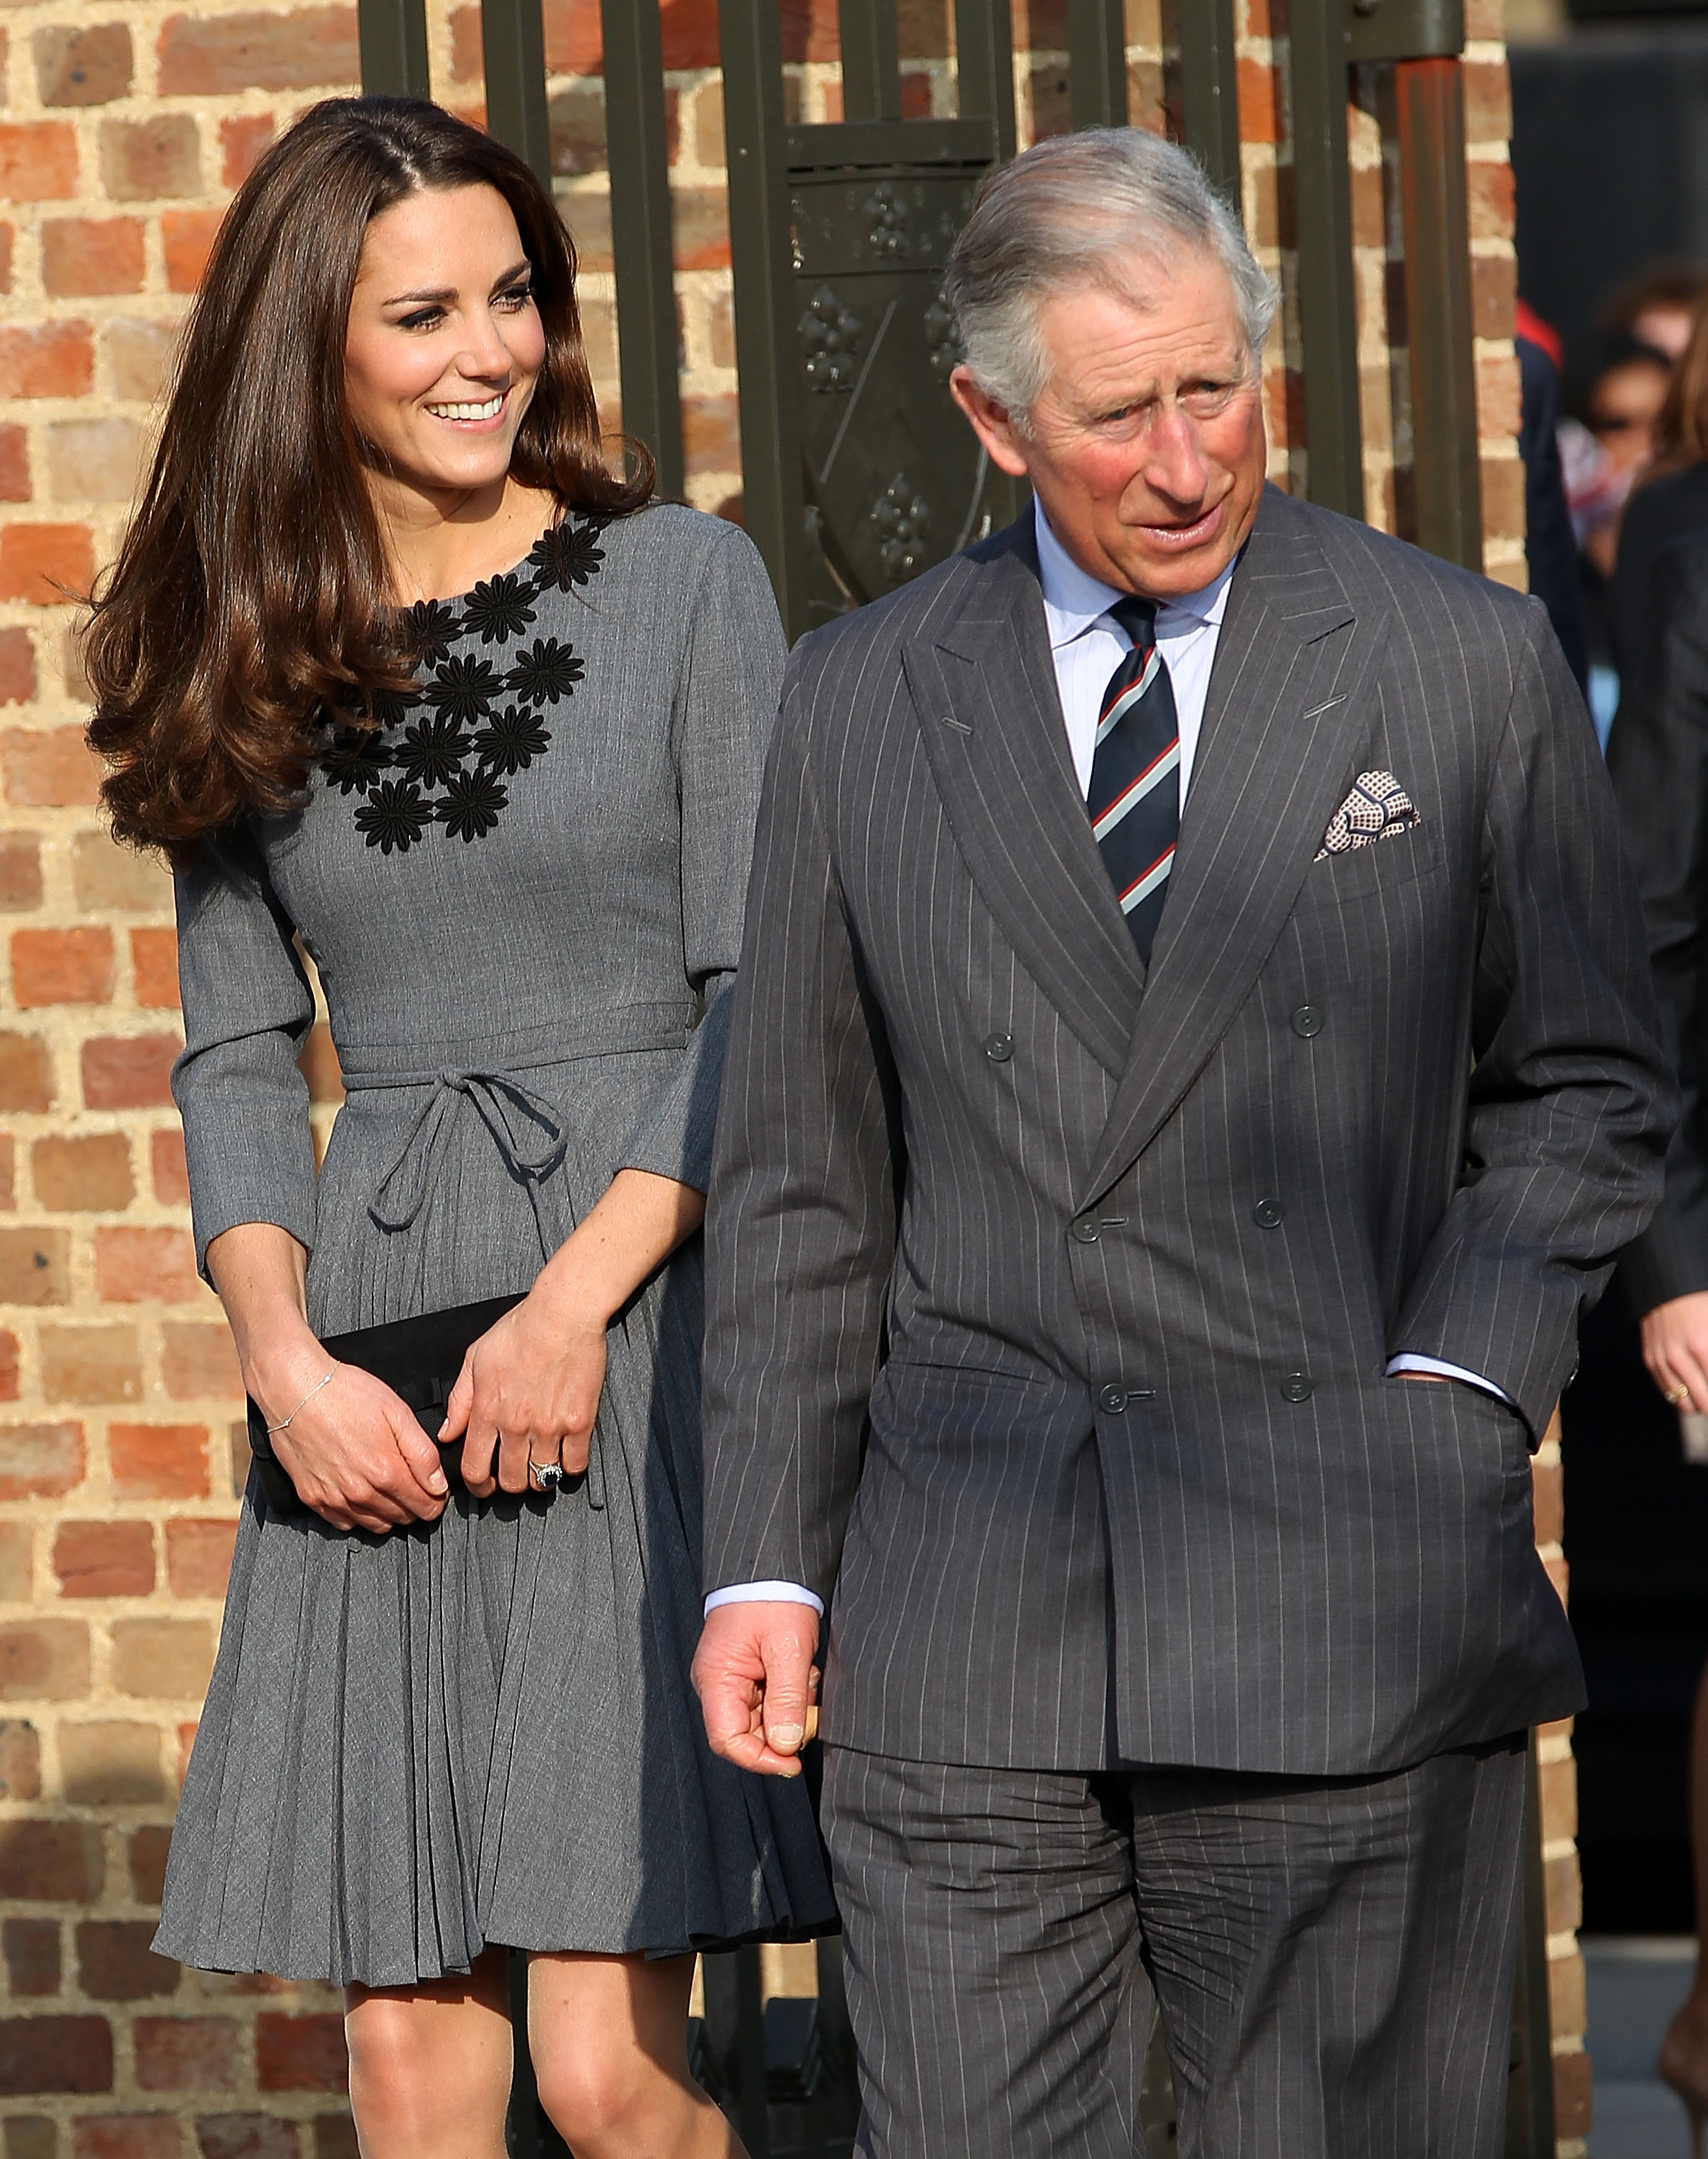 Princess Catherine and King Charles visit The Prince's Foundation for Children and The Arts at Dulwich Picture Gallery in London, England on March 15, 2012 | Source: Getty Images